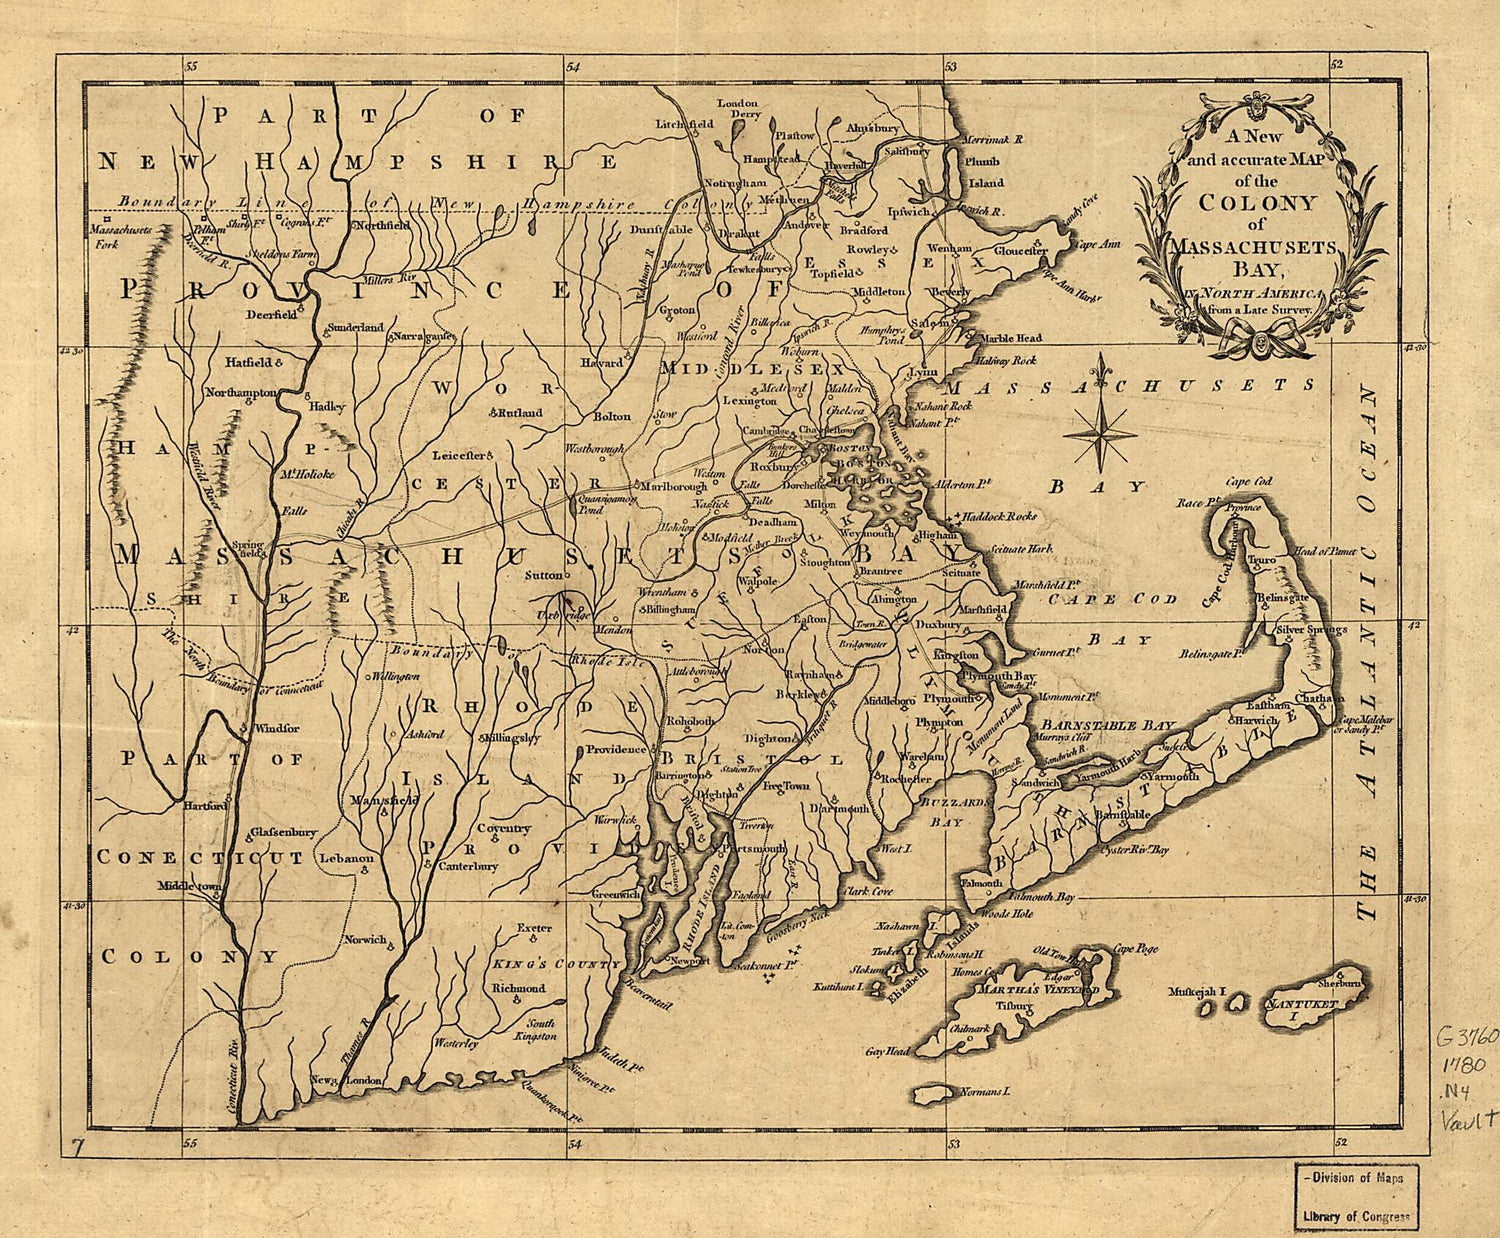 This old map of A New and Accurate Map of the Colony of Massachusets i.e. Massachusetts Bay, In North America, from a Late Survey. (New and Accurate Map of the Colony of Massachusets Bay, New and Accurate Map of the Colony of Massachusetts Bay) from 1780